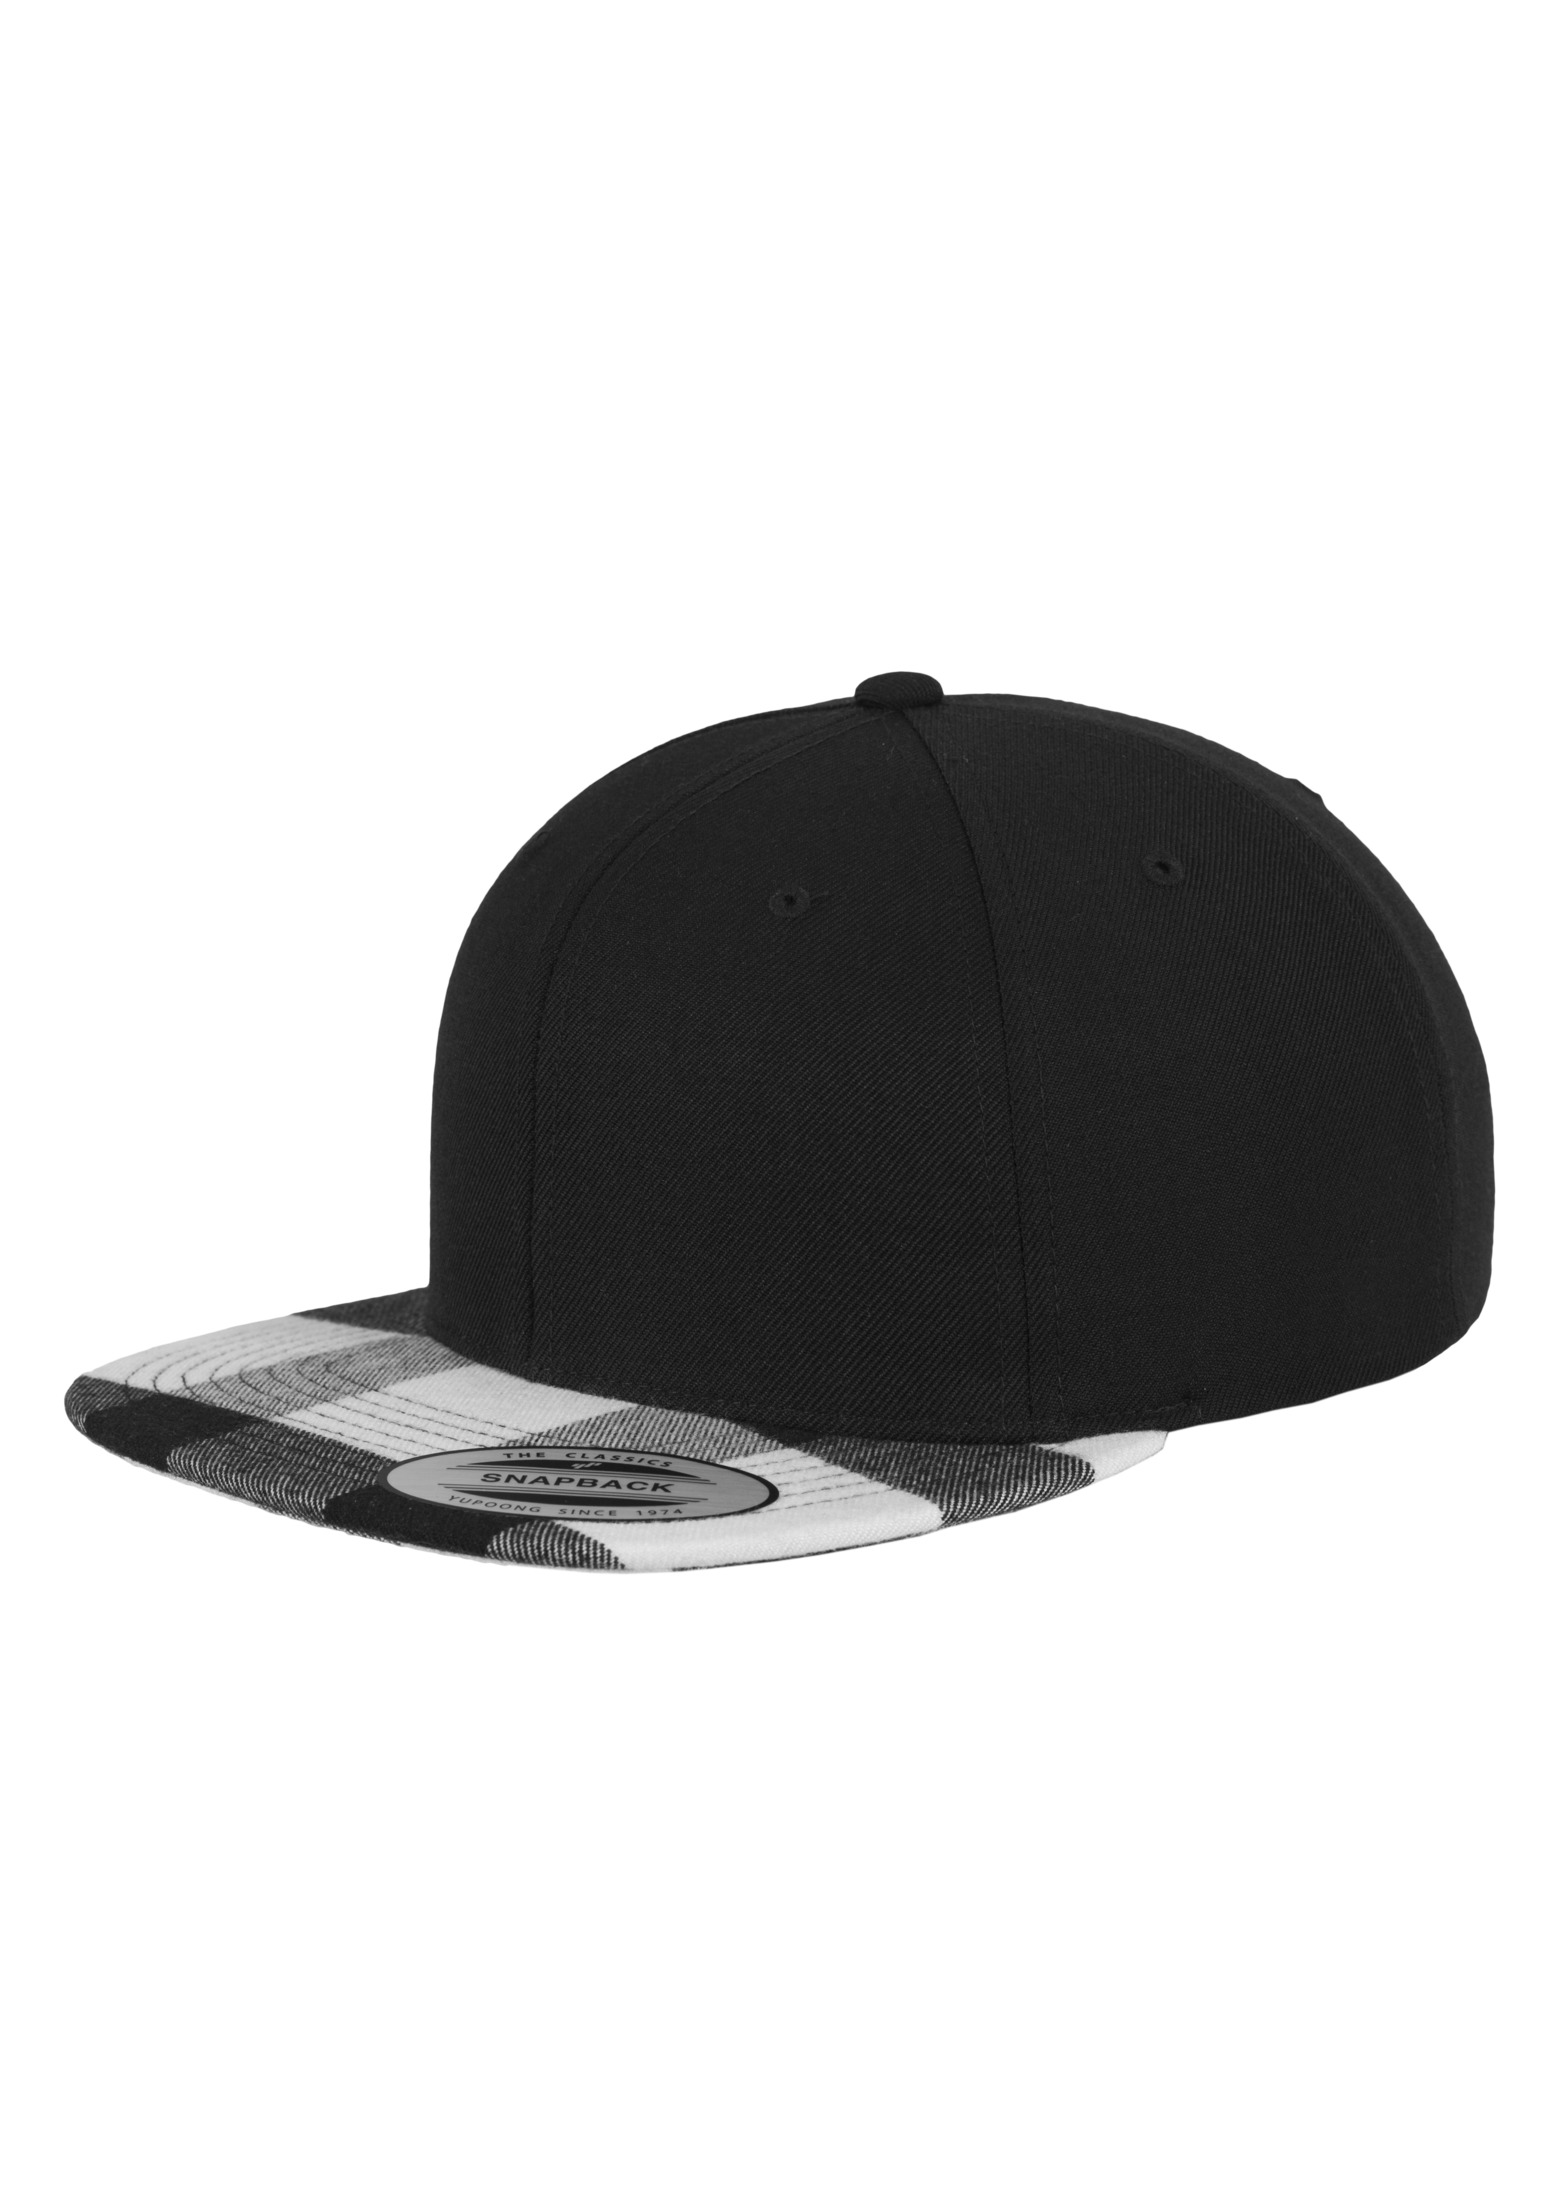 Snapback Checked Flanell Peak Snapback in Farbe blk/wht